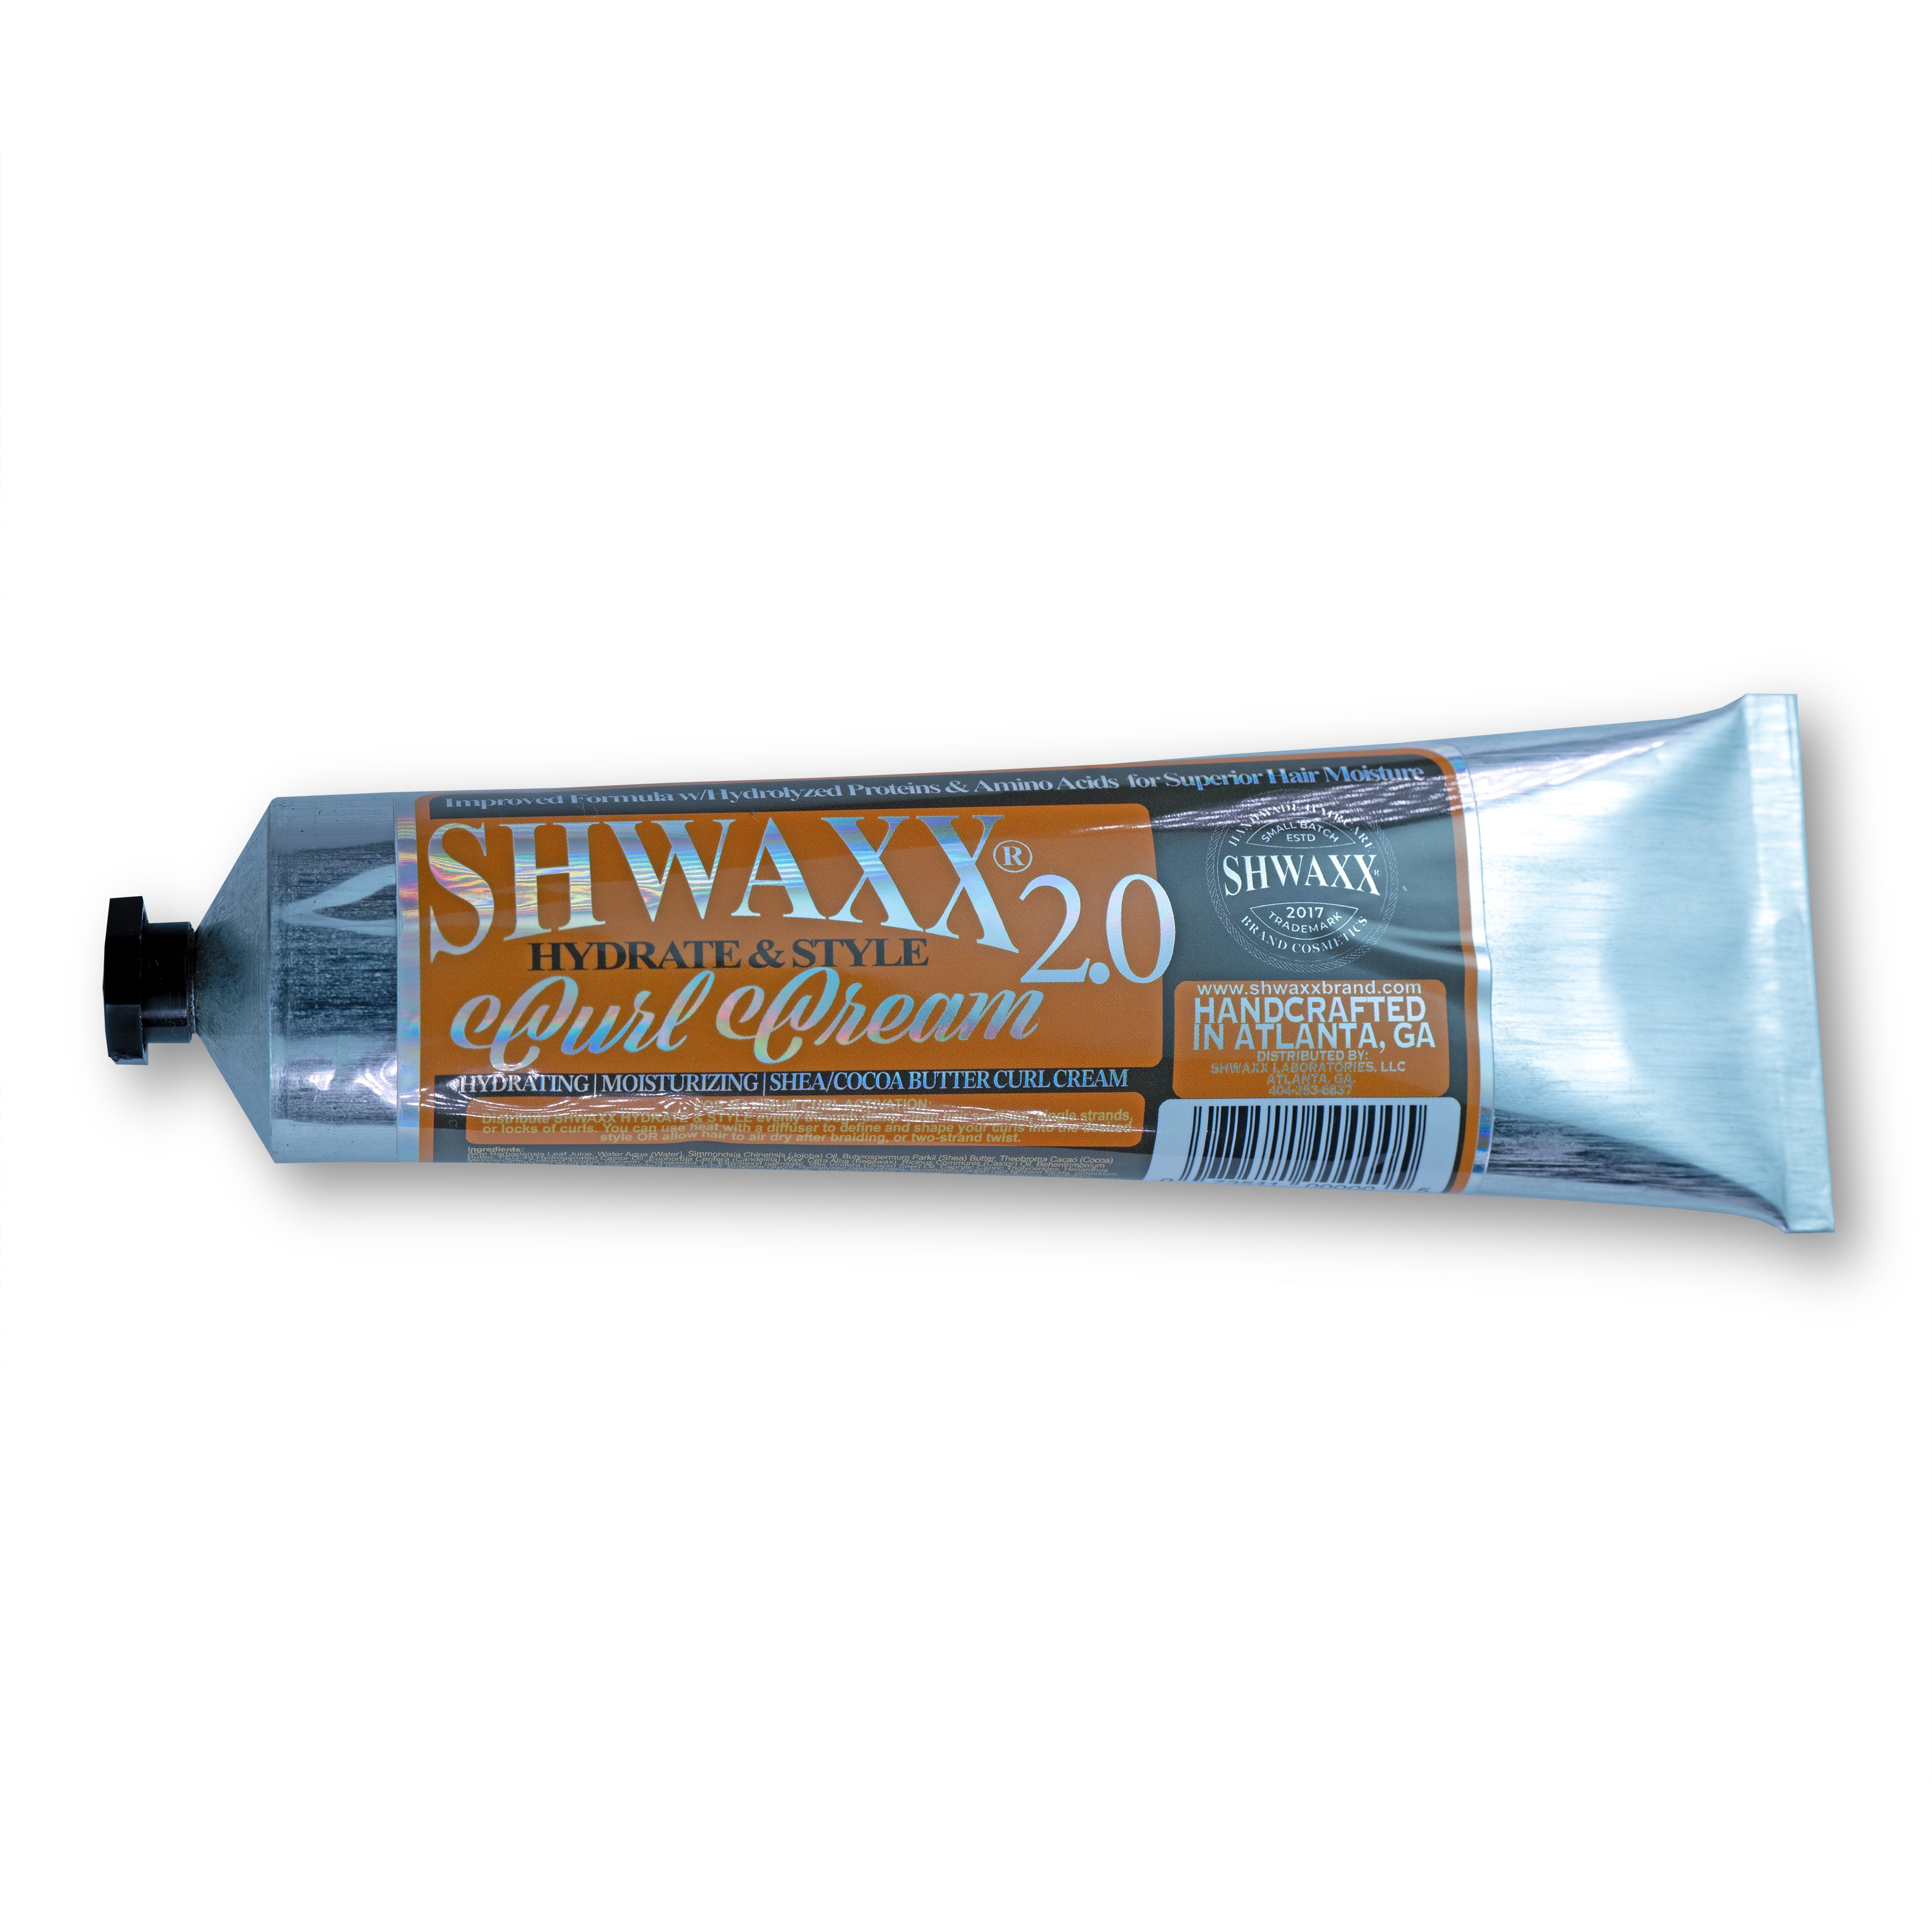 Shwaxx HYDRATE AND STYLE 2.0 | Curl Cream | Daily Moisturizer, Conditi